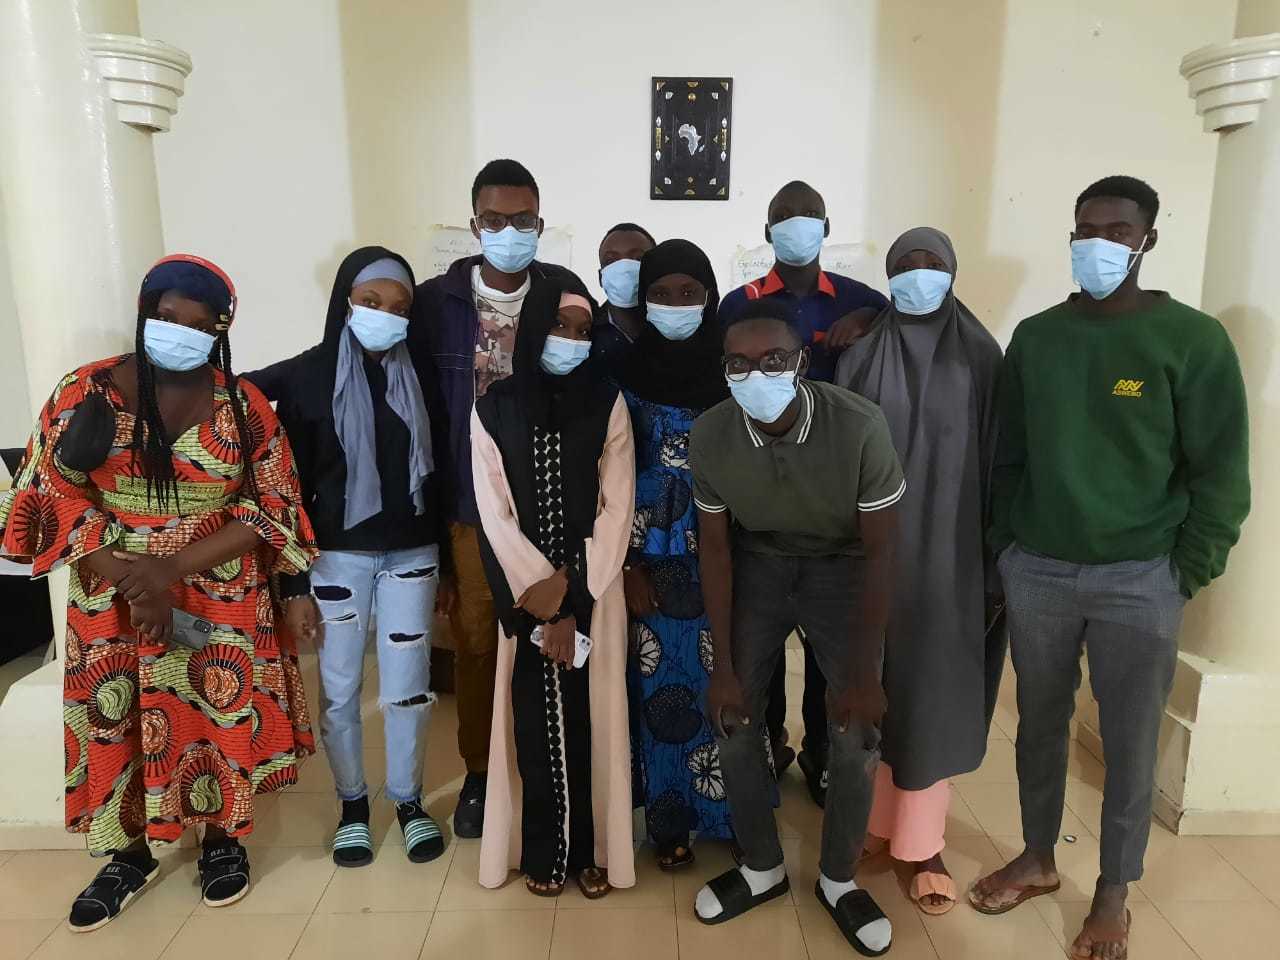 Malian students wearing masks, posing for a group photo